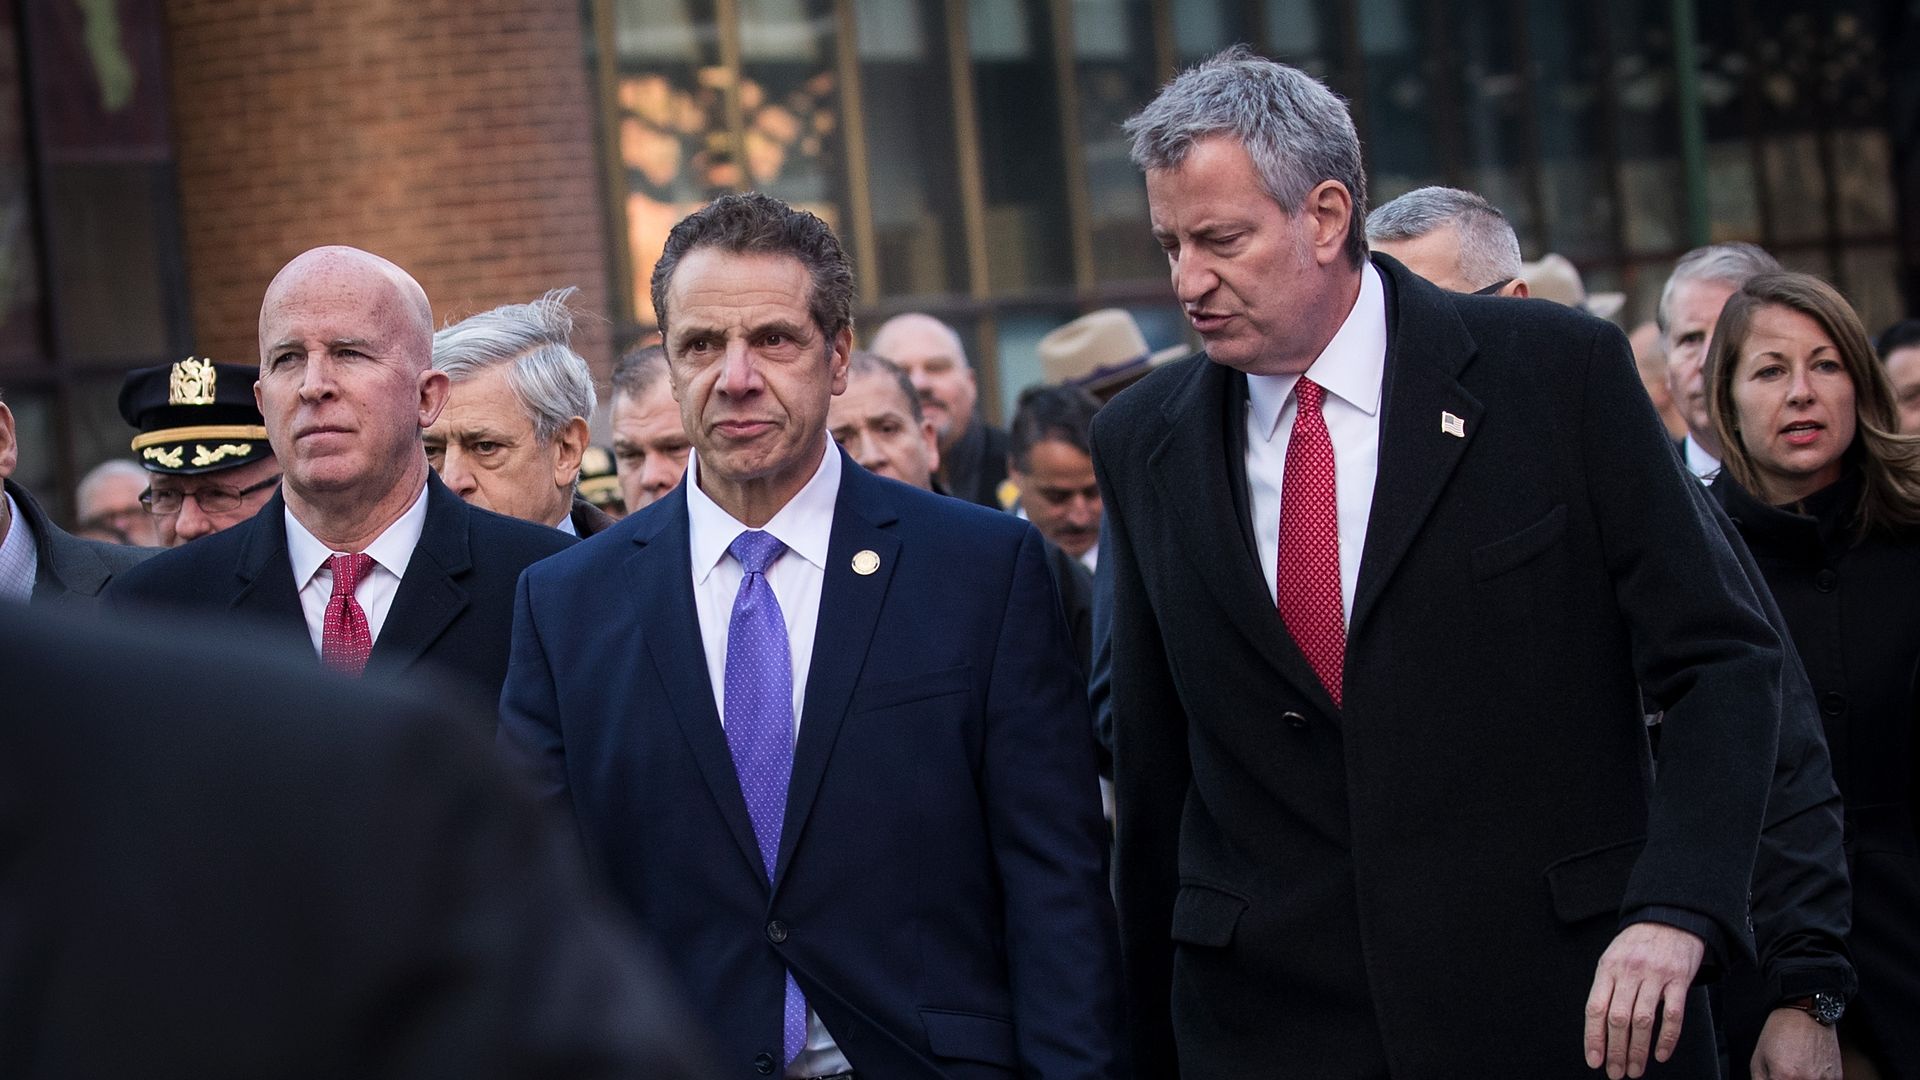 NY Governor Andrew Cuomo. Photo by Drew Angerer/Getty Images